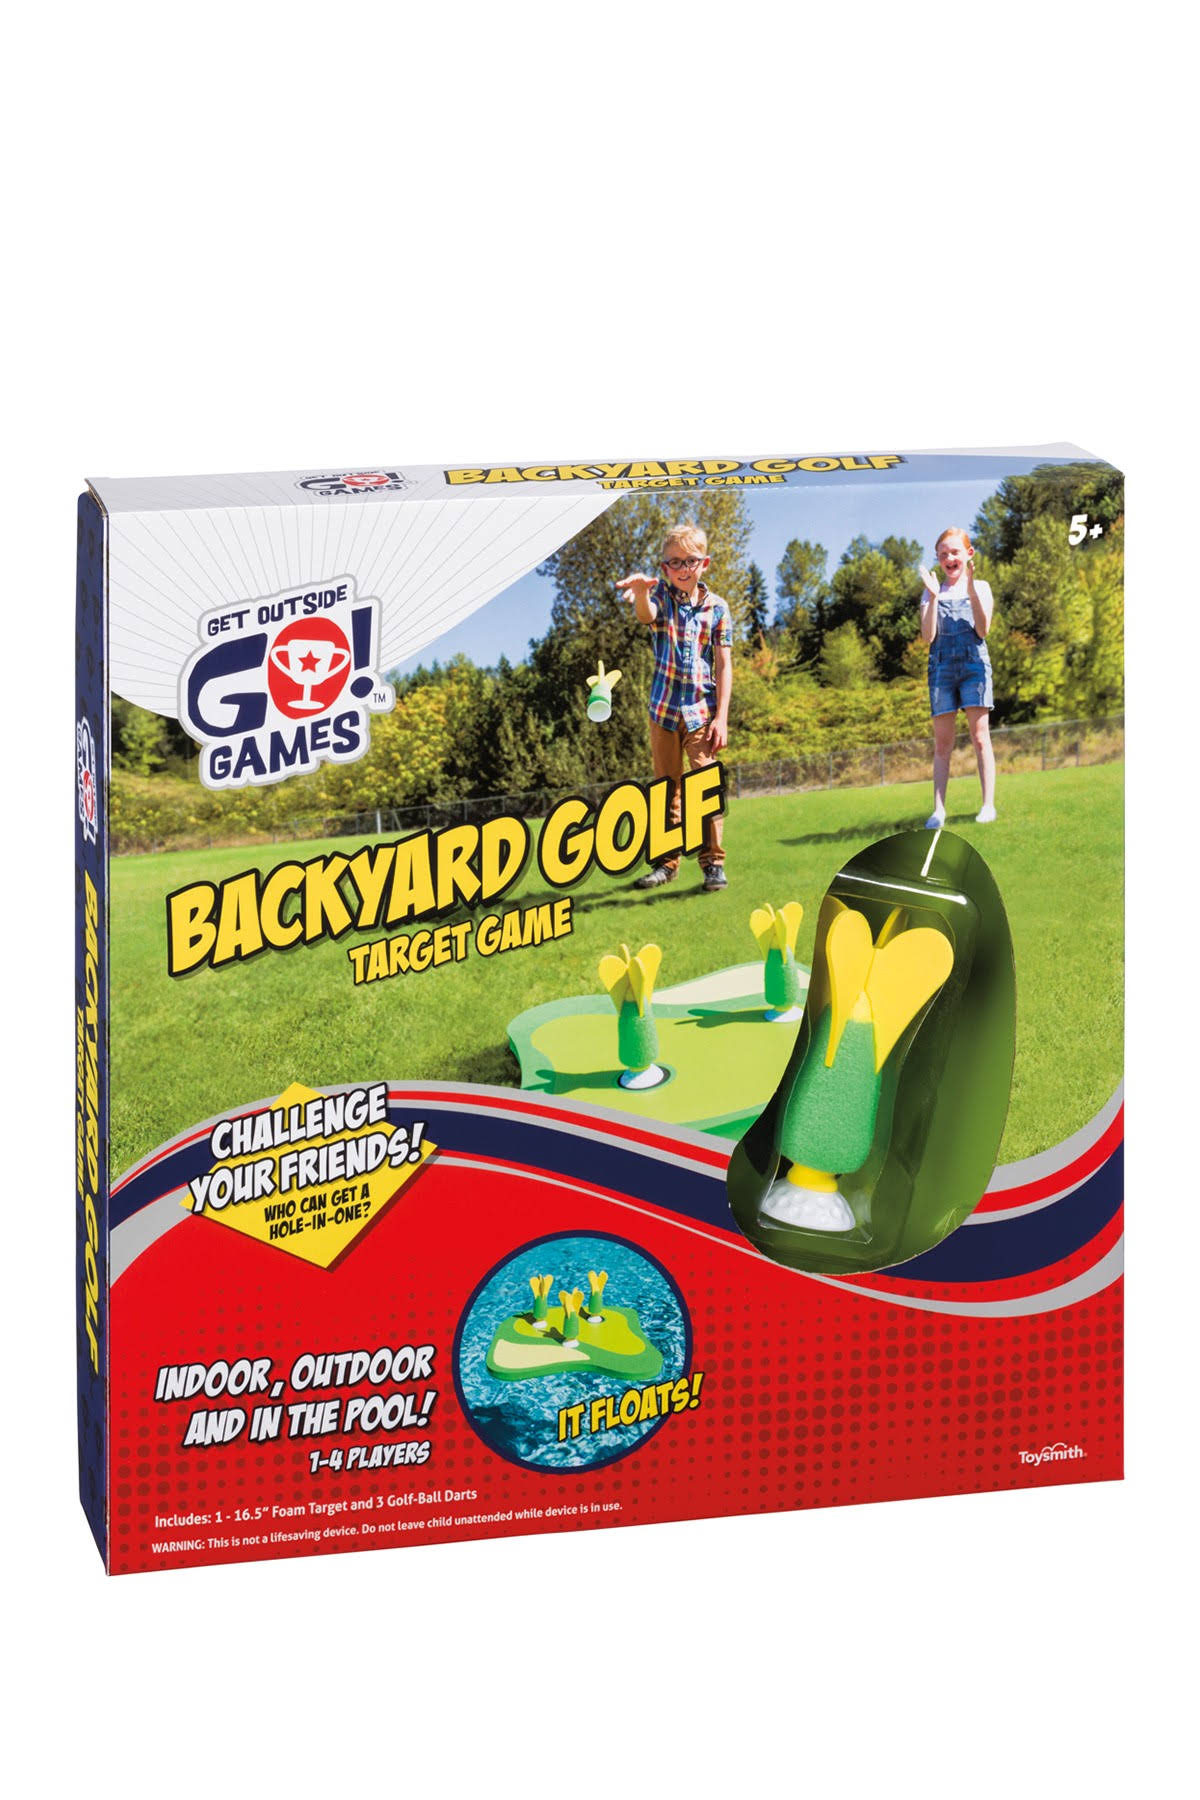 Backyard Golf Target Game, Indoor / Outdoor-Pool Game Floats for Boys